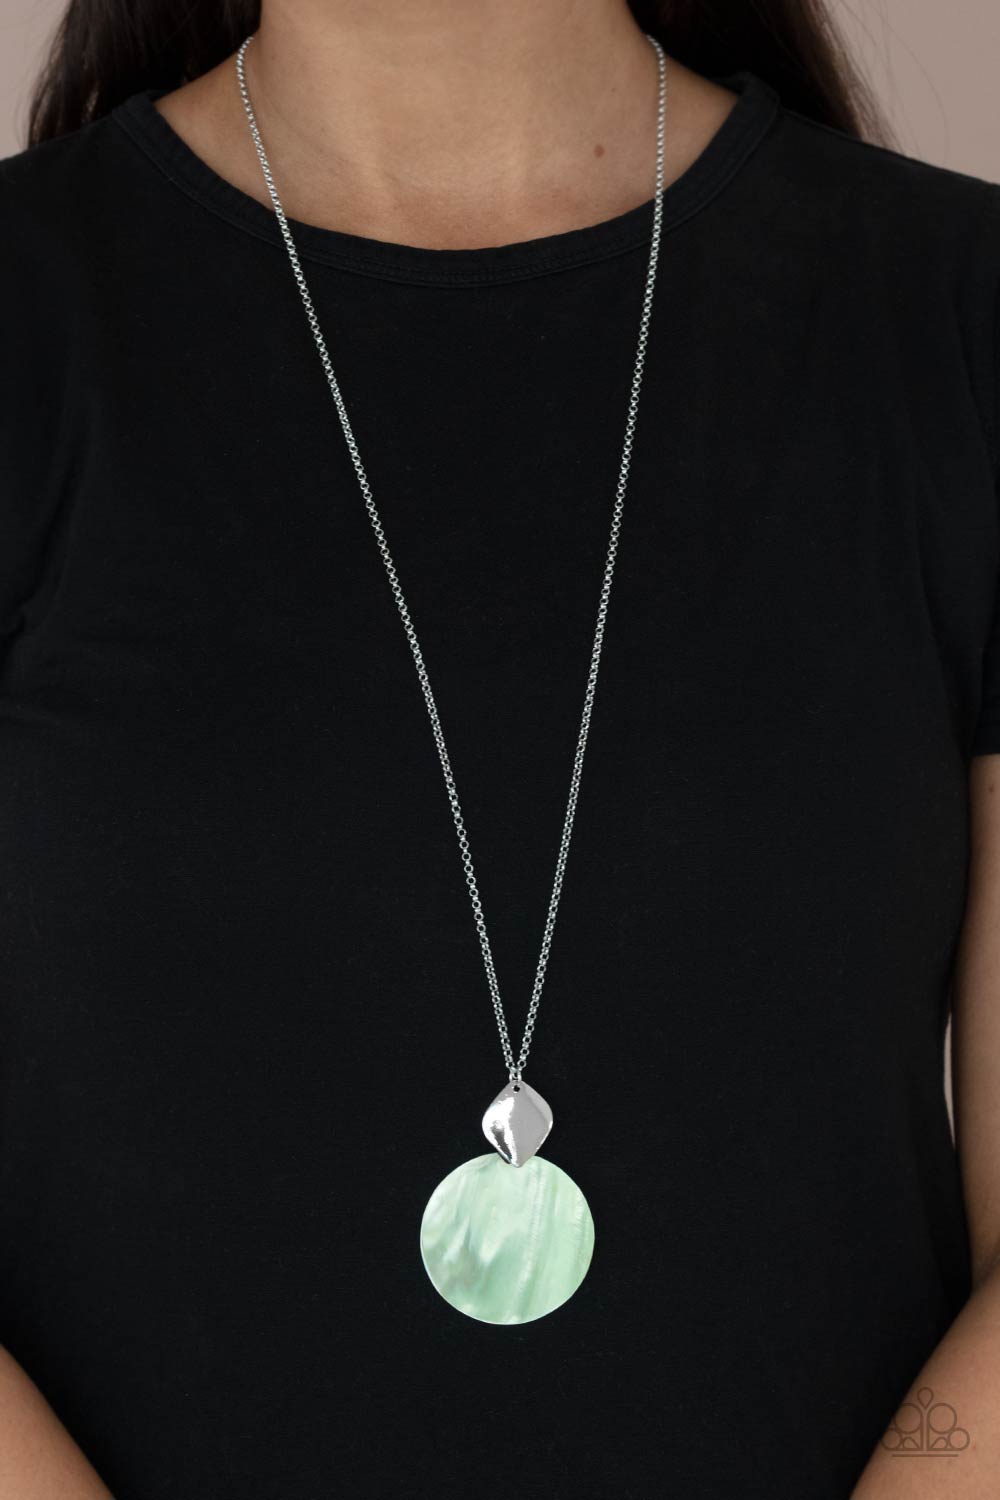 Paparazzi Accessories - Tidal Tease - Green Necklace